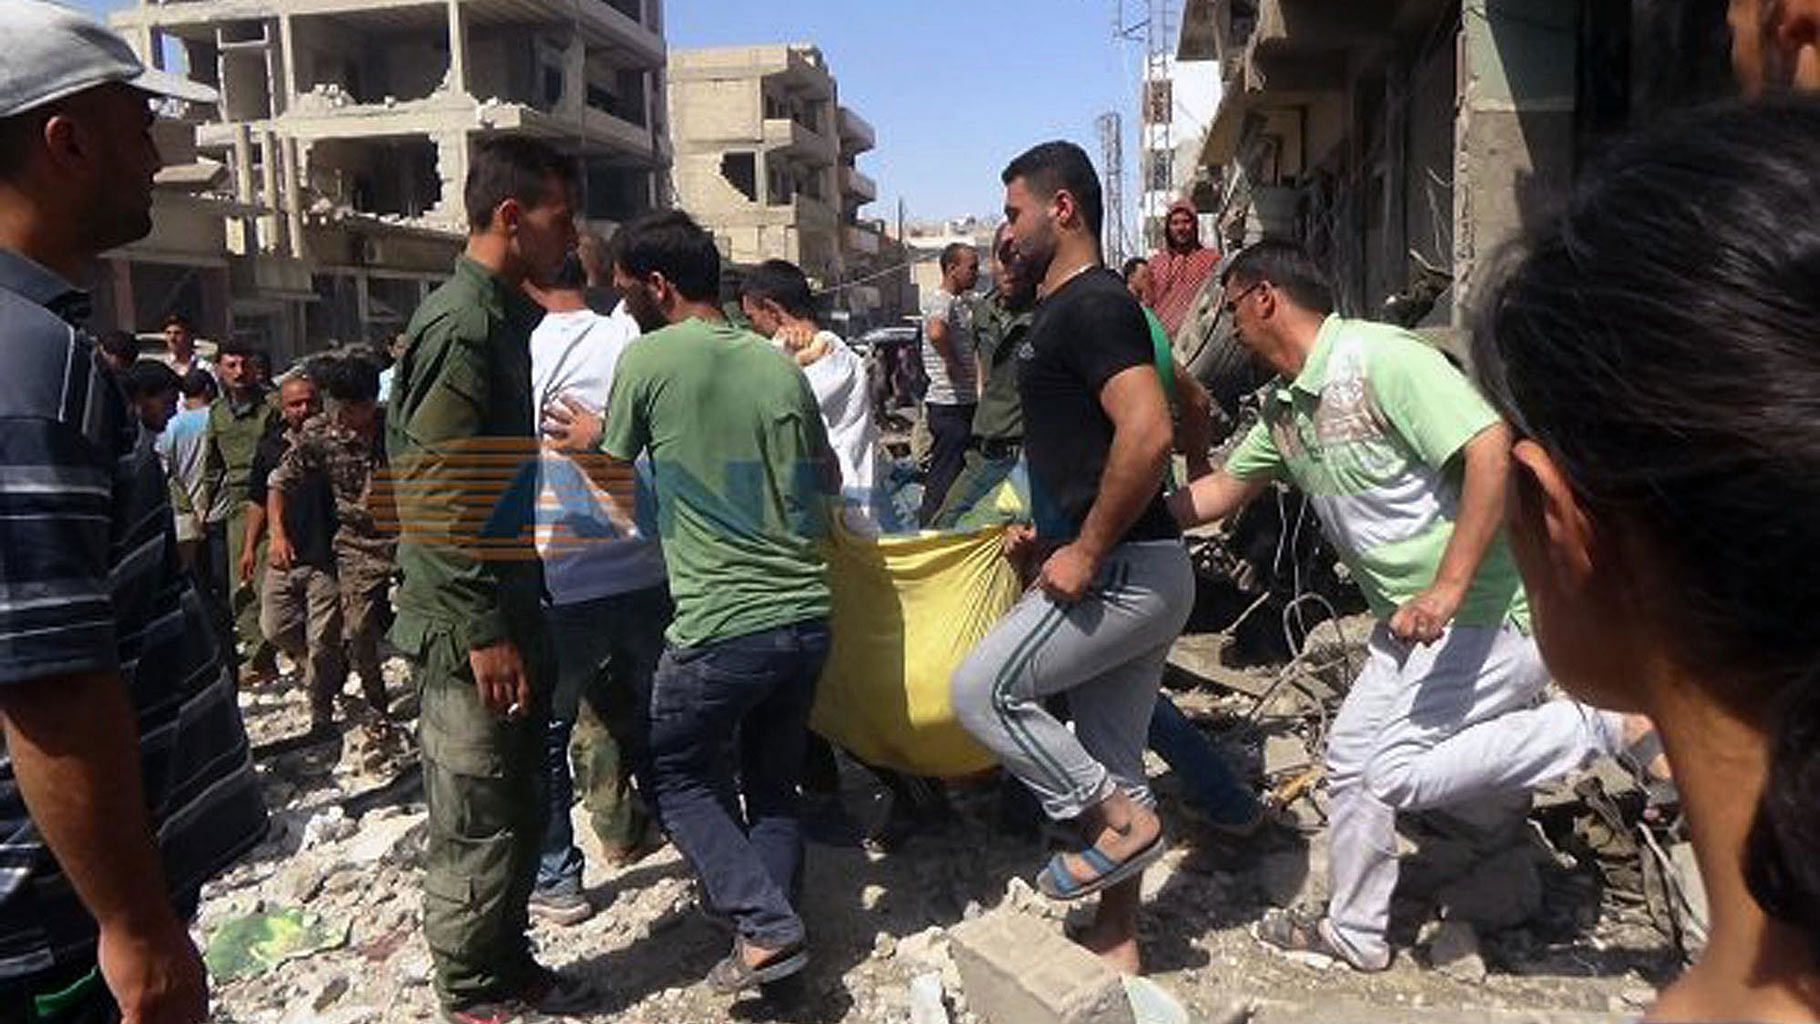 Syrians carry a victim after twin bombings struck Kurdish town of Qamishli, Syria, Wednesday on July 27. (Photo: AP)